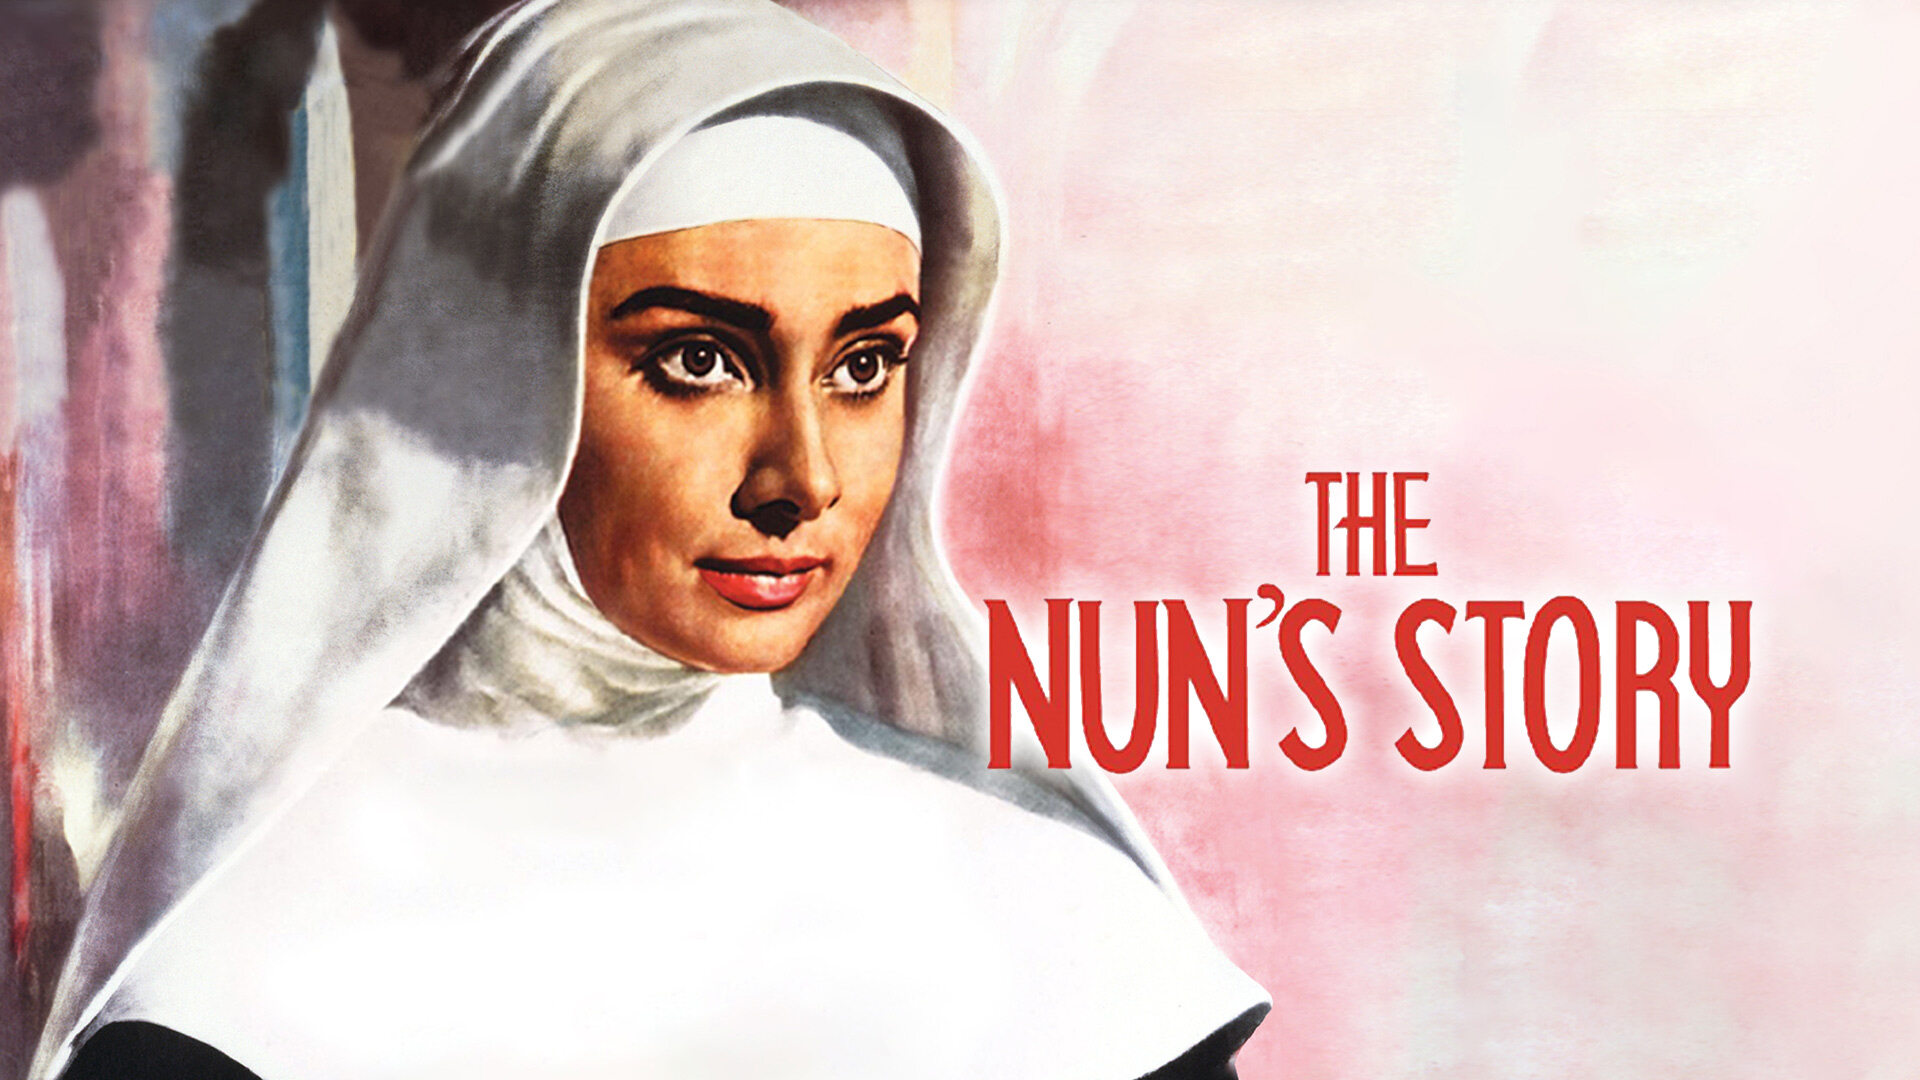 43-facts-about-the-movie-the-nuns-story